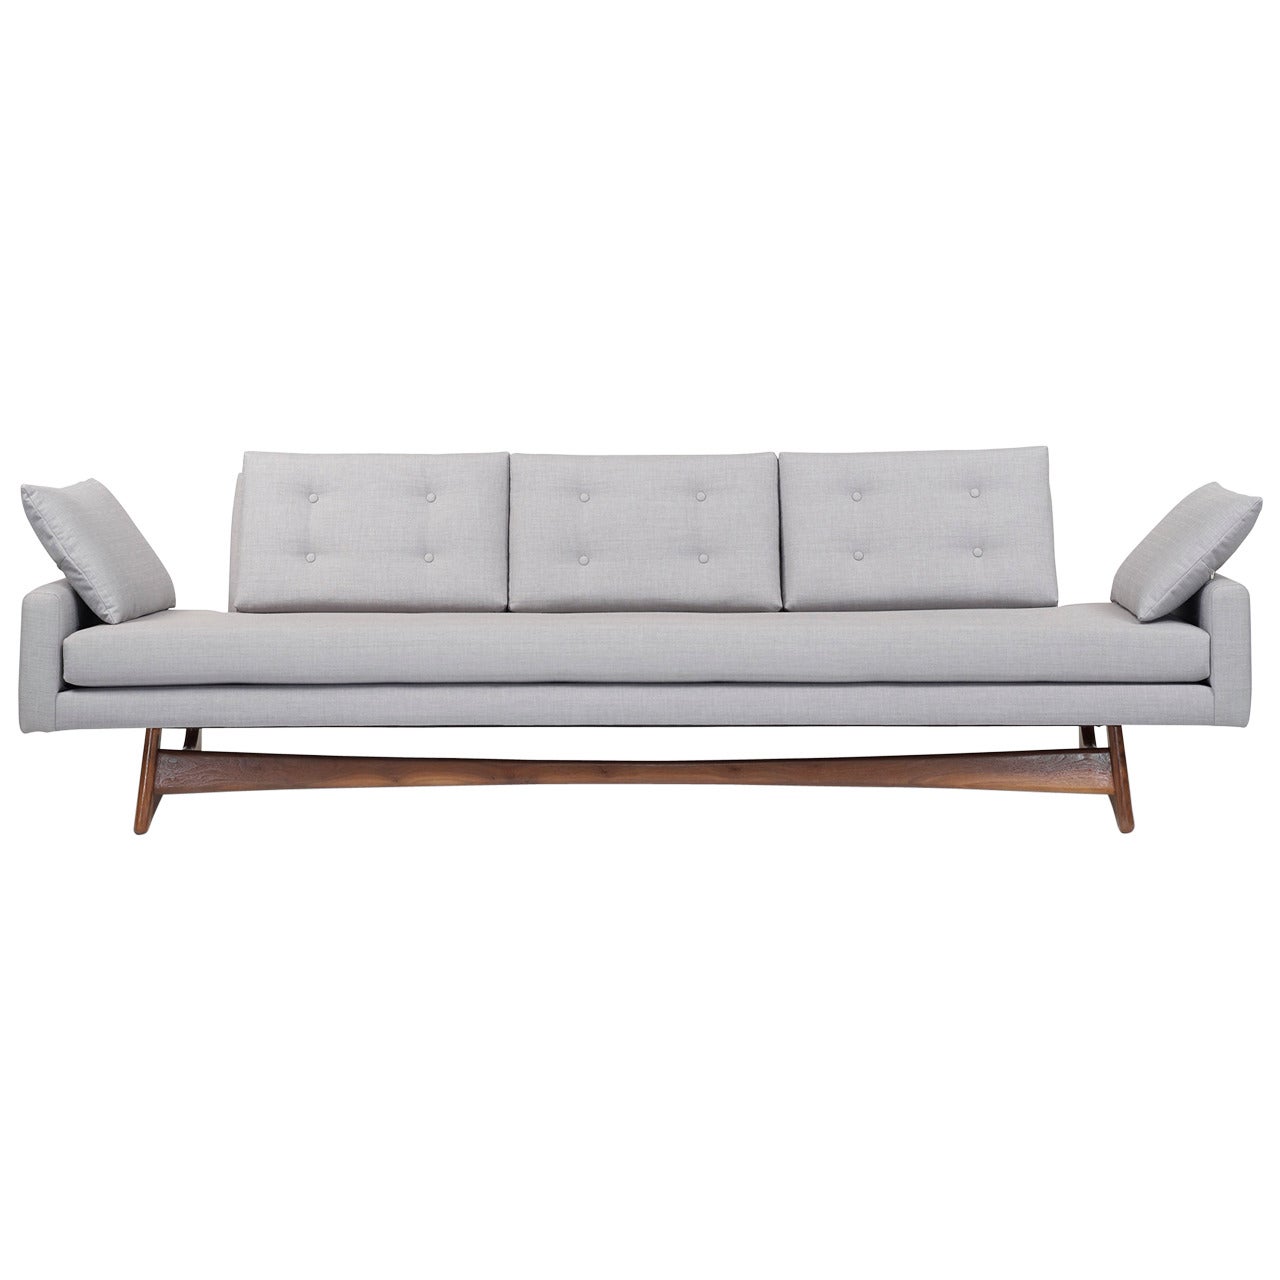 Sofa, Model 2408 by Adrian Pearsall for Craft Associates